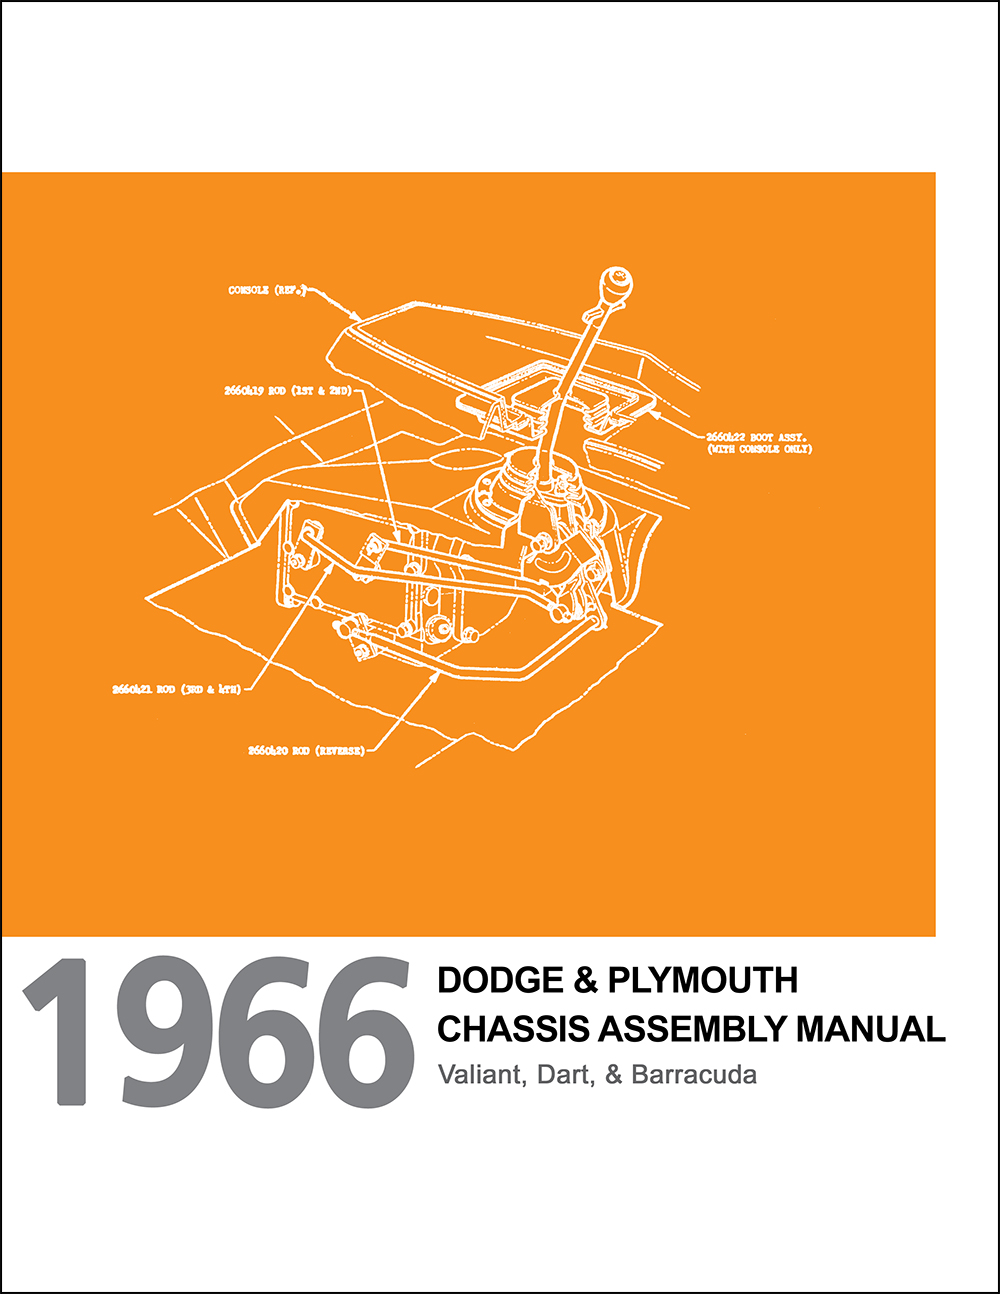 1966 Dart, Valiant, and Barracuda Chassis and Engine Equipment Assembly Manual Reprint